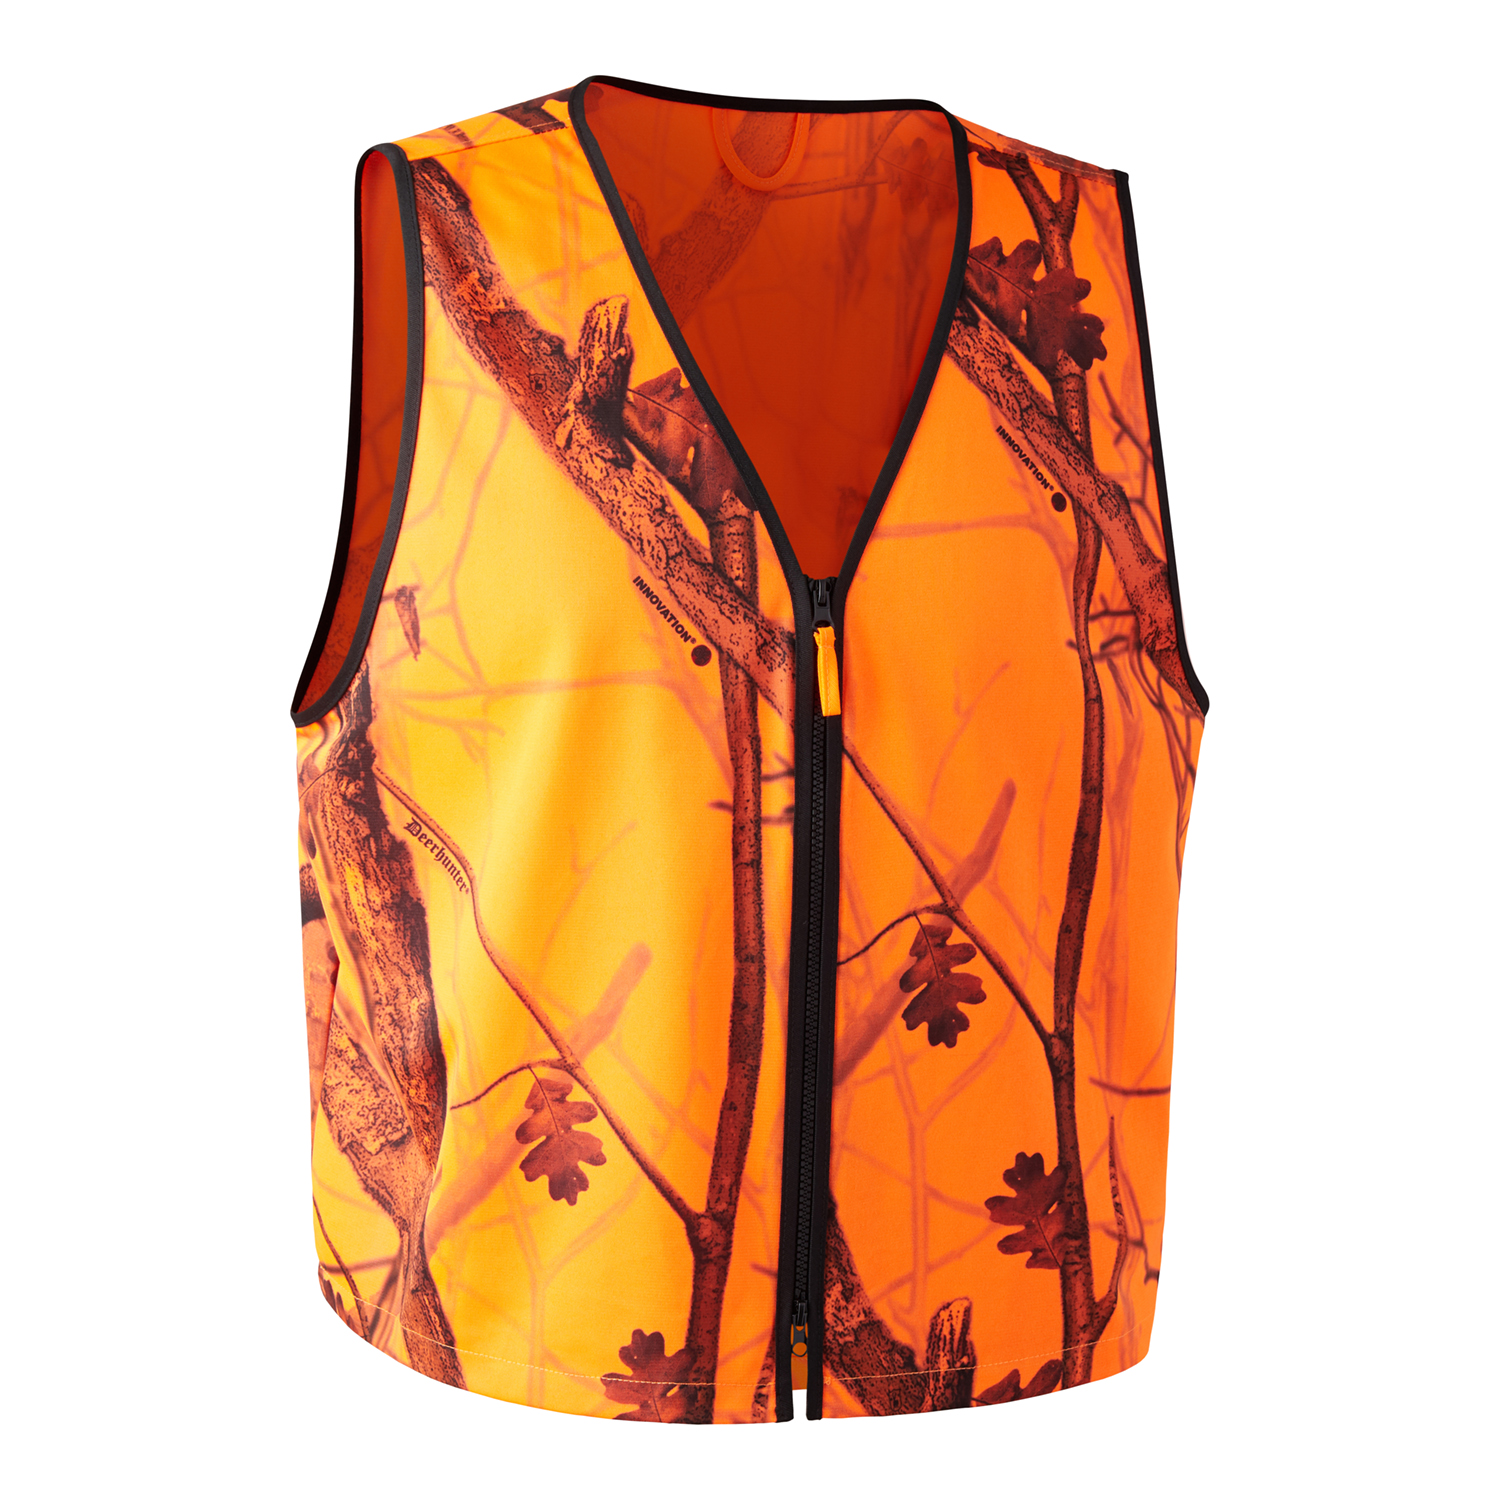 Protector Pull-over Vest - Orange GH Camo - XL thumbnail